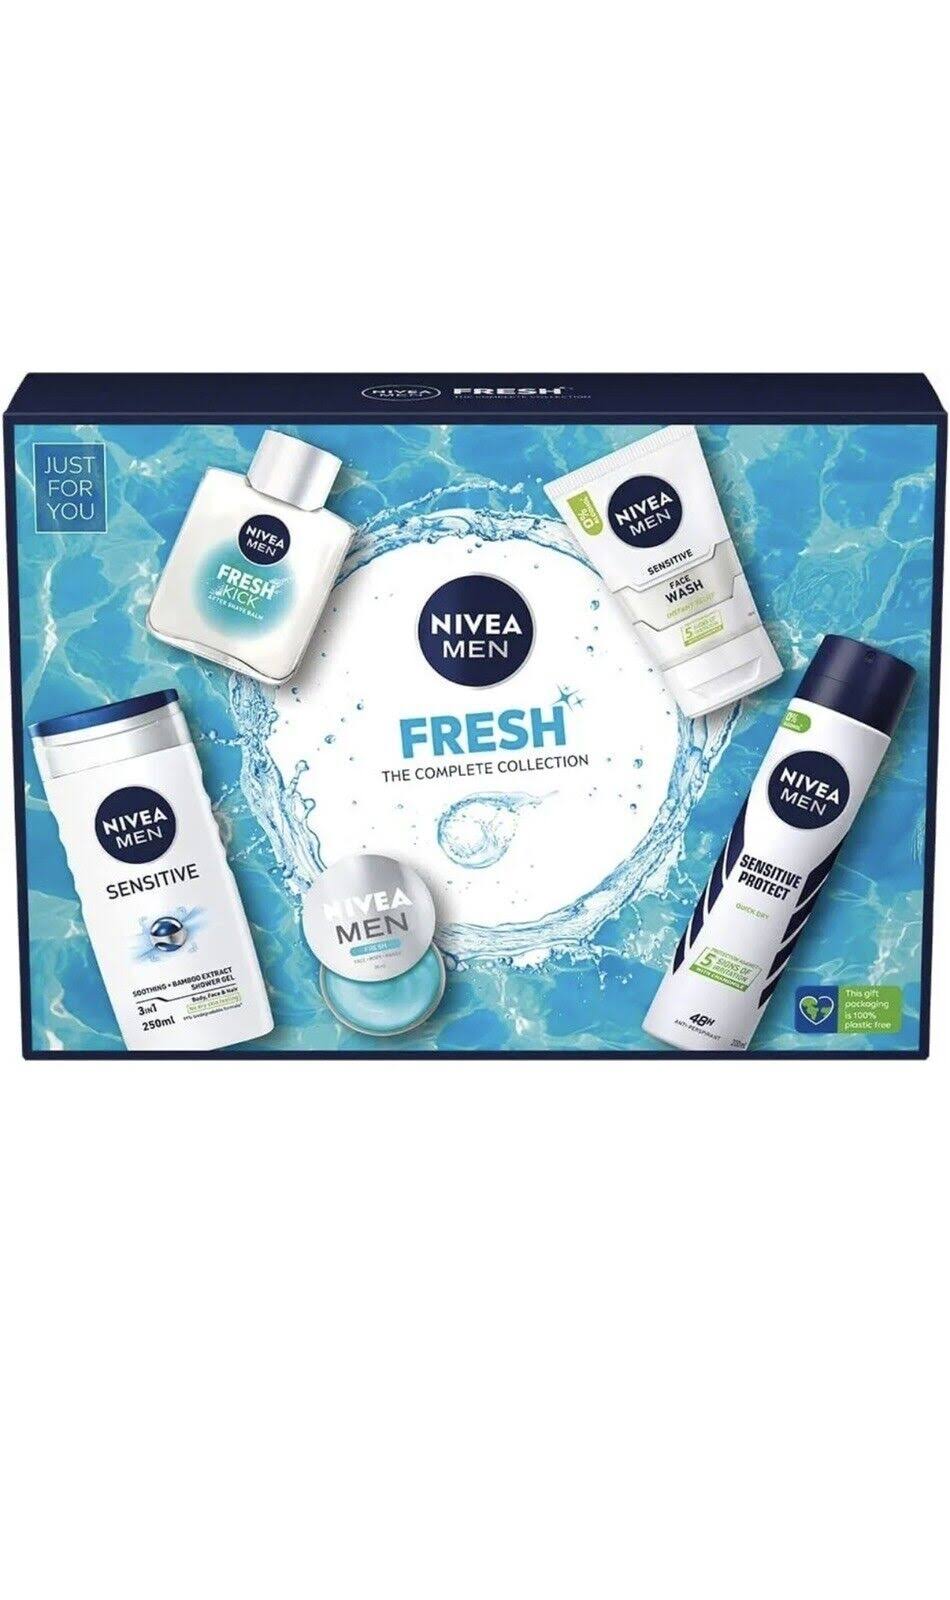 Nivea For Men Fresh The Complete Collection Gift Set by dpharmacy